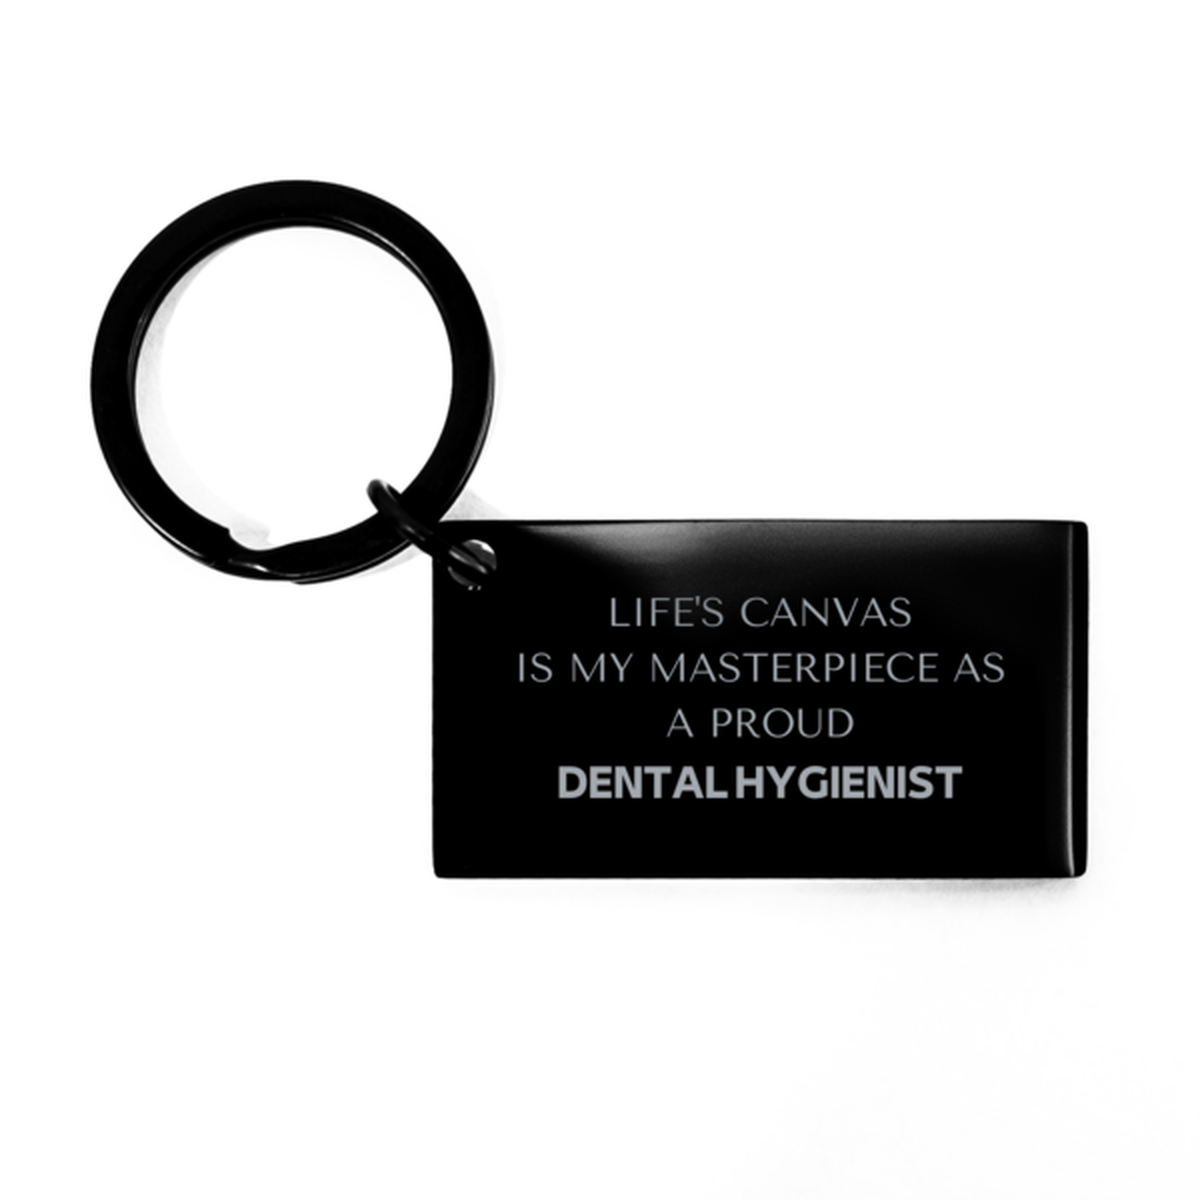 Proud Dental Hygienist Gifts, Life's canvas is my masterpiece, Epic Birthday Christmas Unique Keychain For Dental Hygienist, Coworkers, Men, Women, Friends